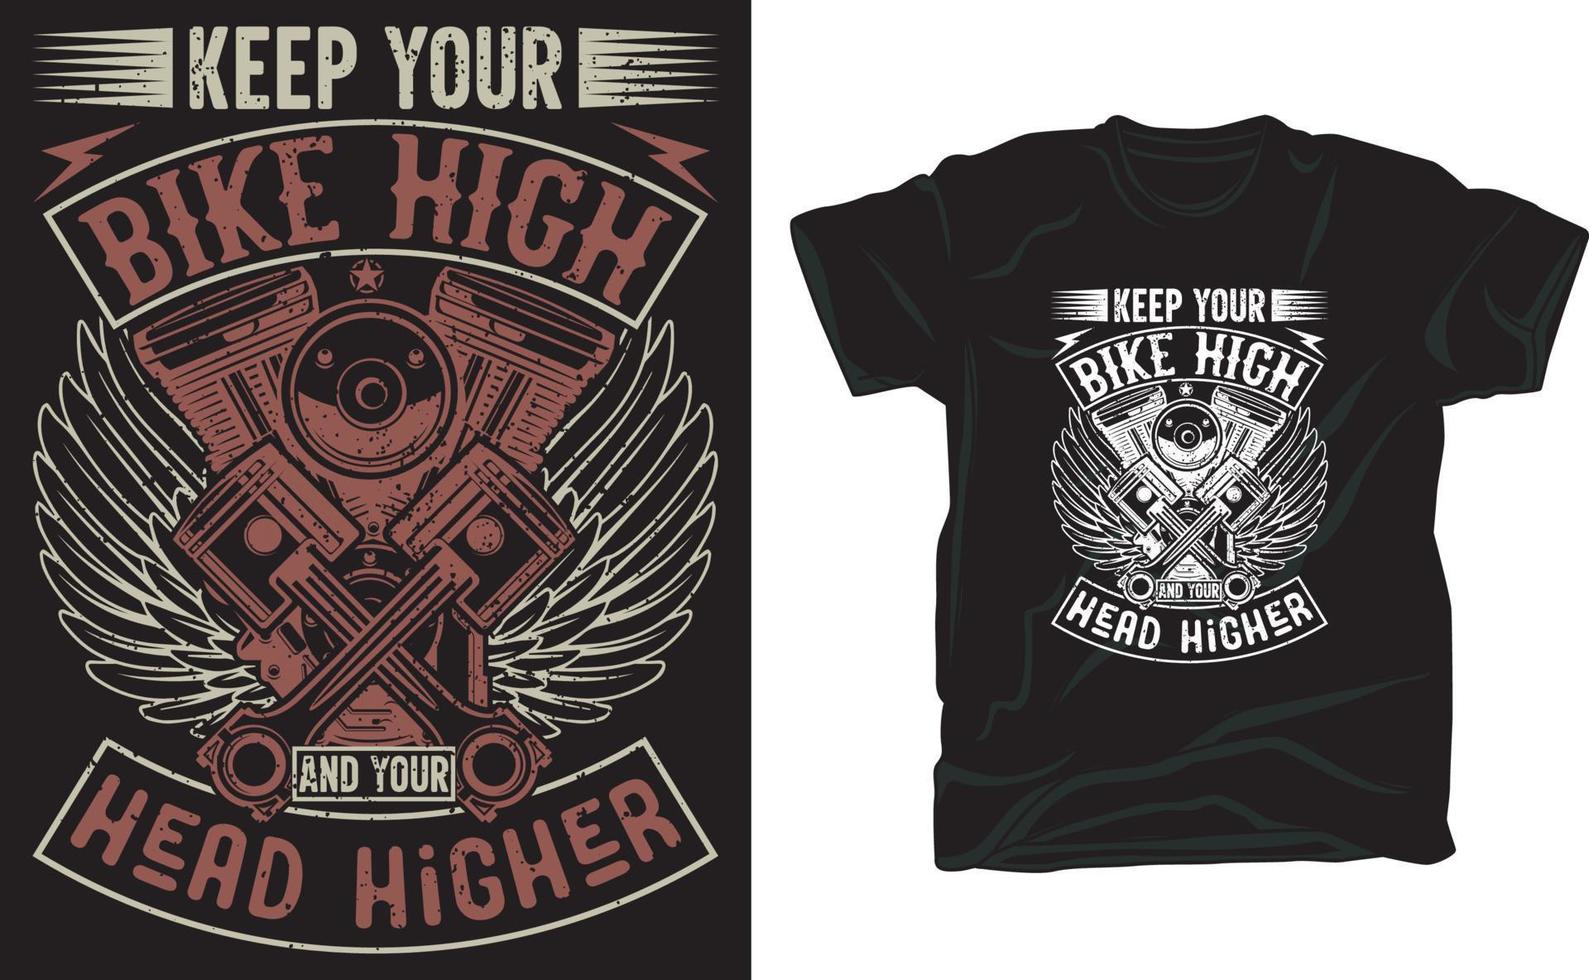 Keep your bike high and your head higher t-shirt design vector